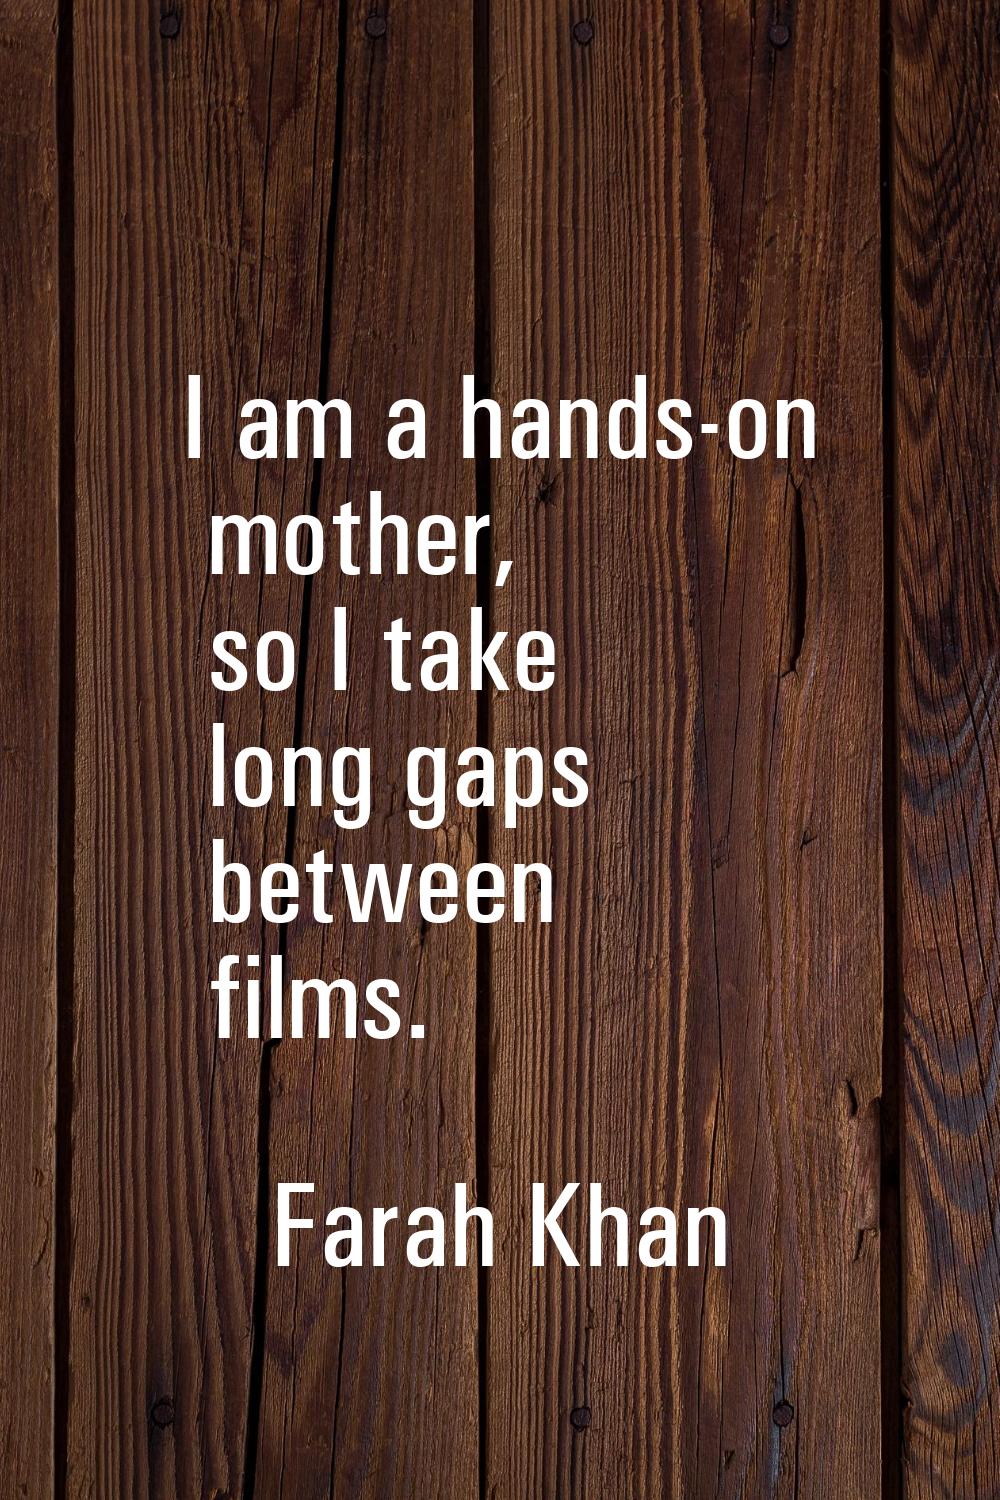 I am a hands-on mother, so I take long gaps between films.